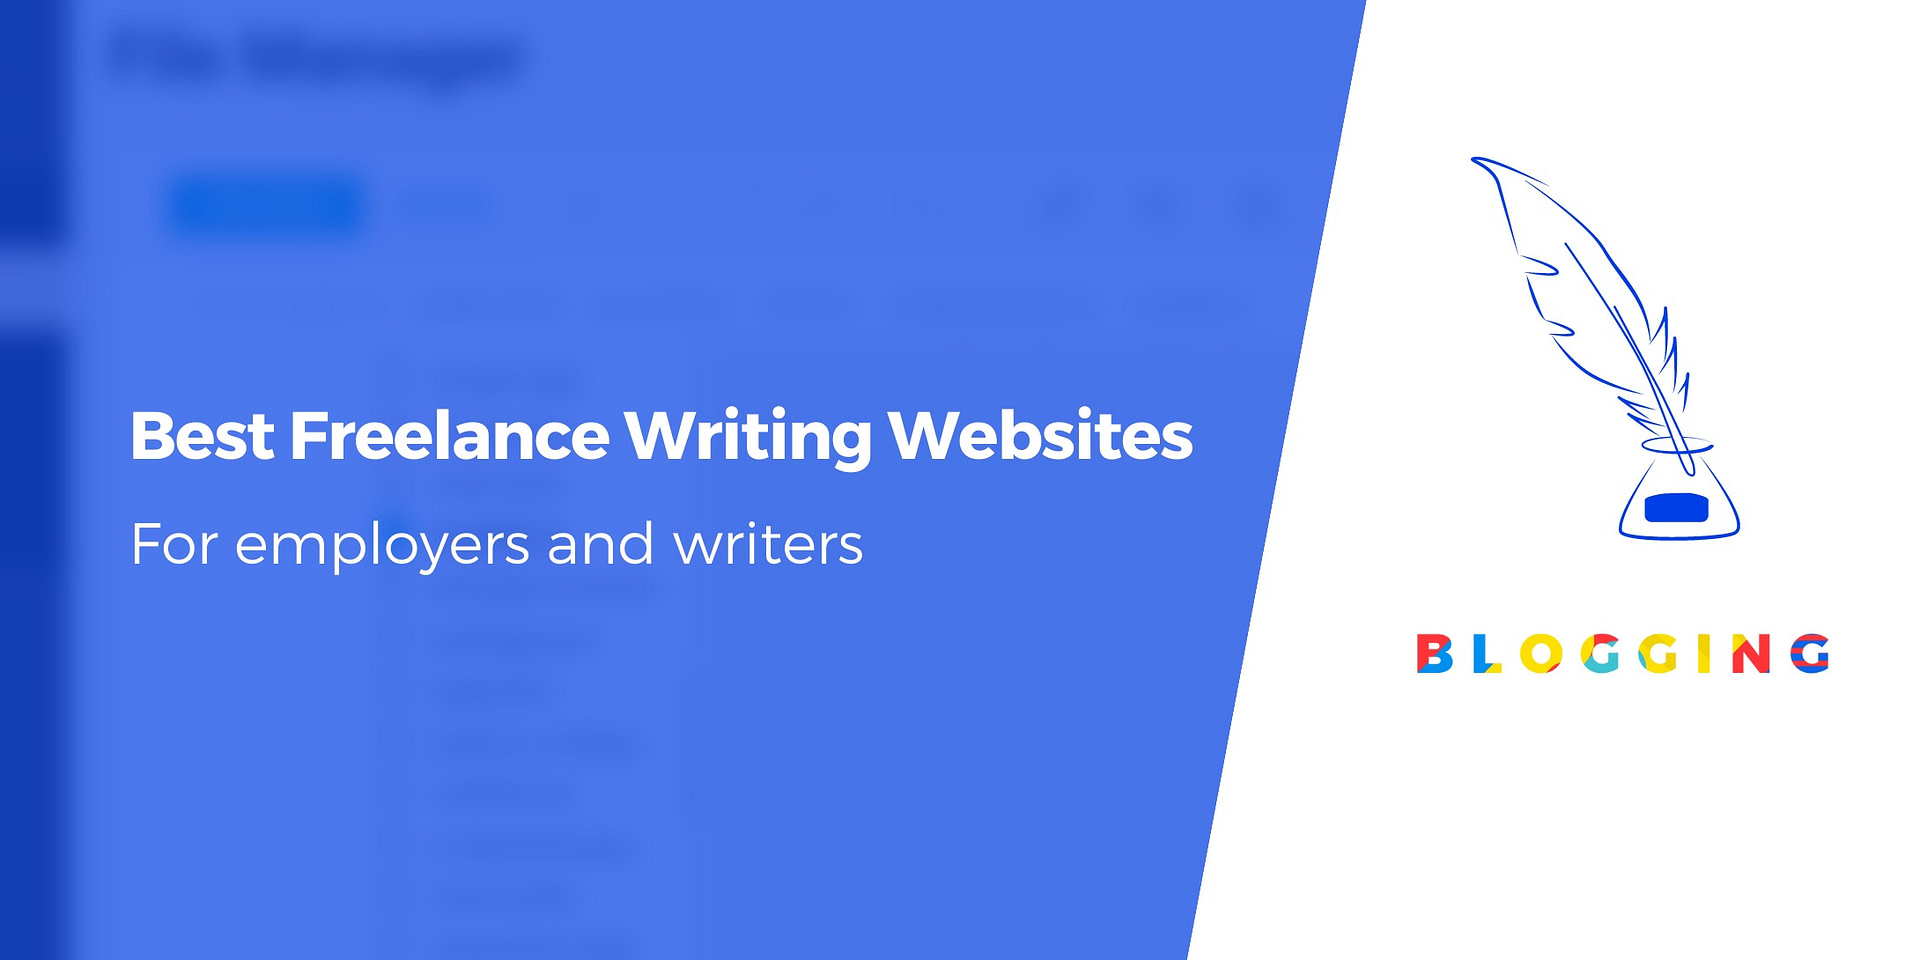 article writing websites like iwriter